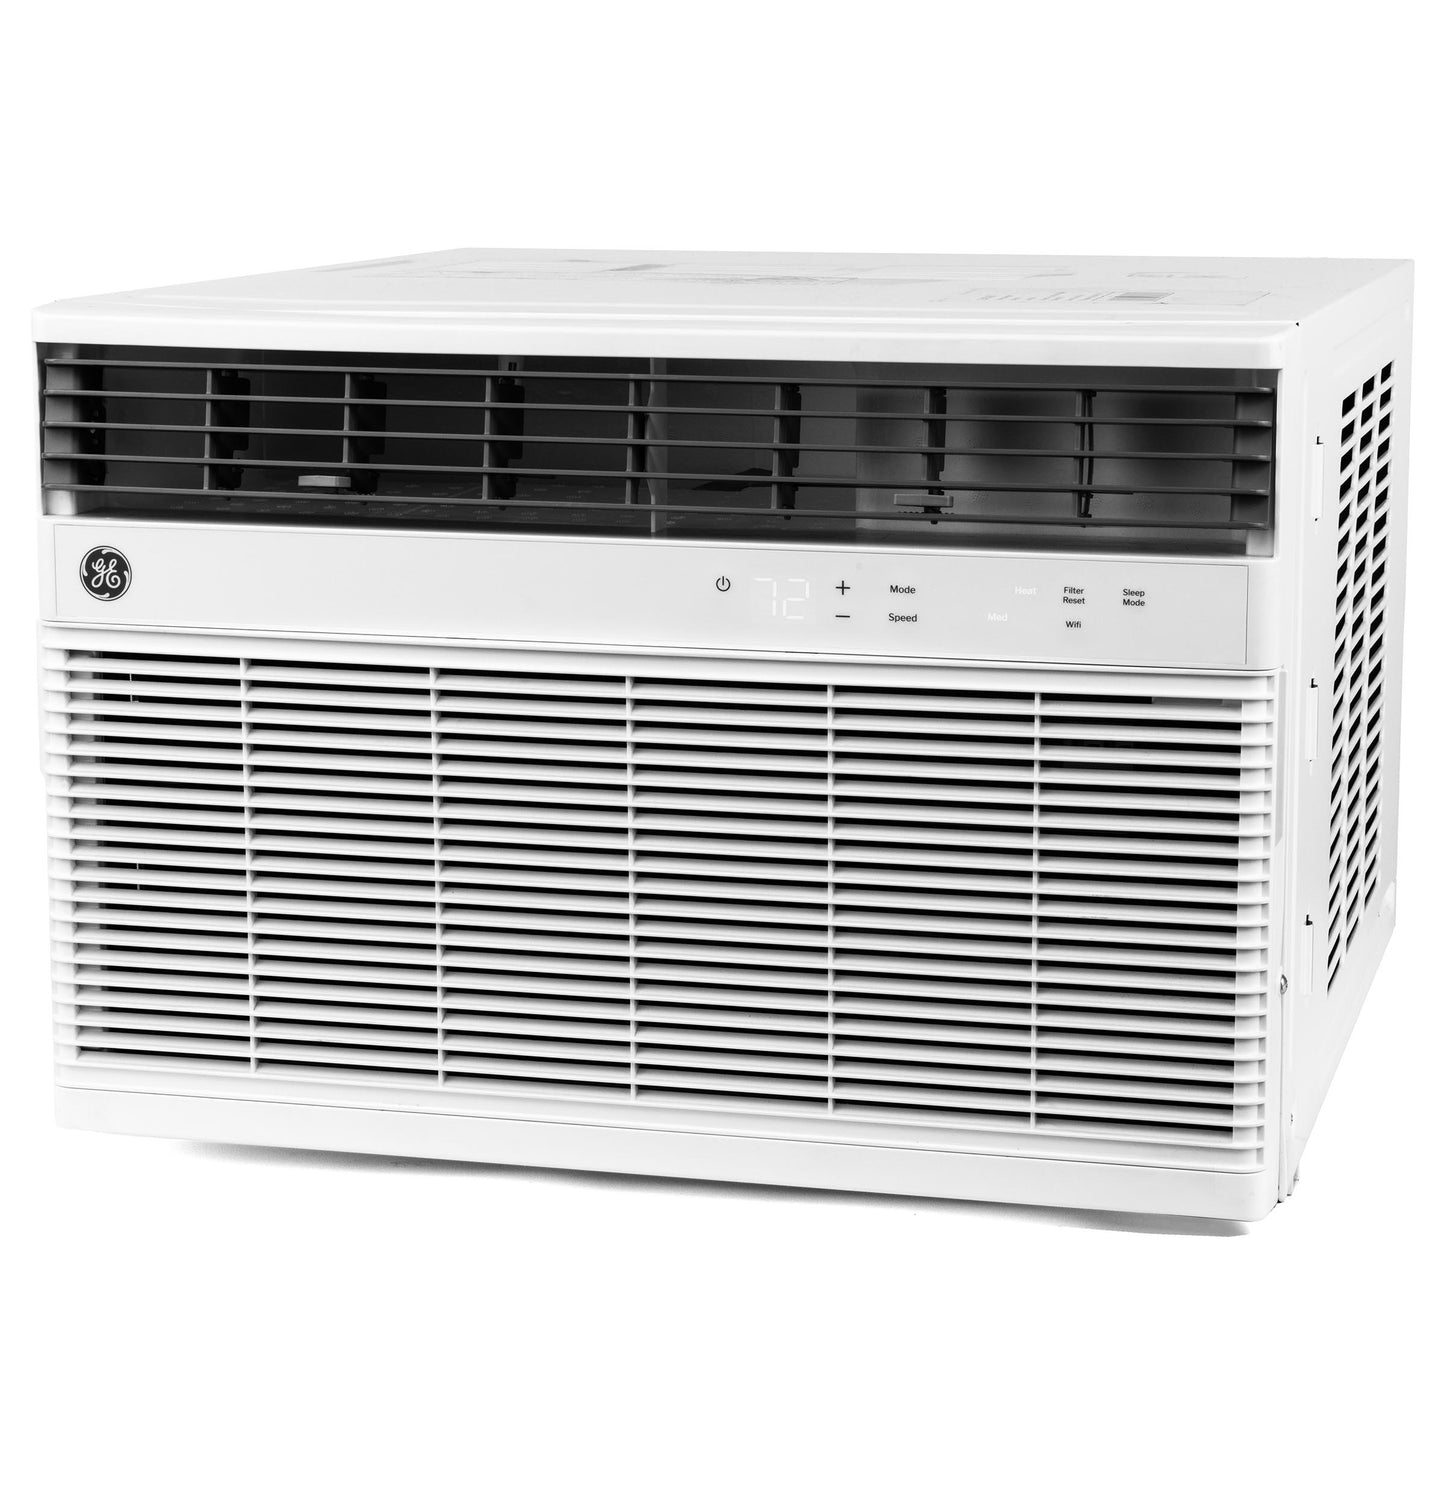 Ge Appliances AWGH24WWF Ge® 24,000 Btu Smart Heat/Cool Electronic Window Air Conditioner For Extra-Large Rooms Up To 1,500 Sq. Ft.